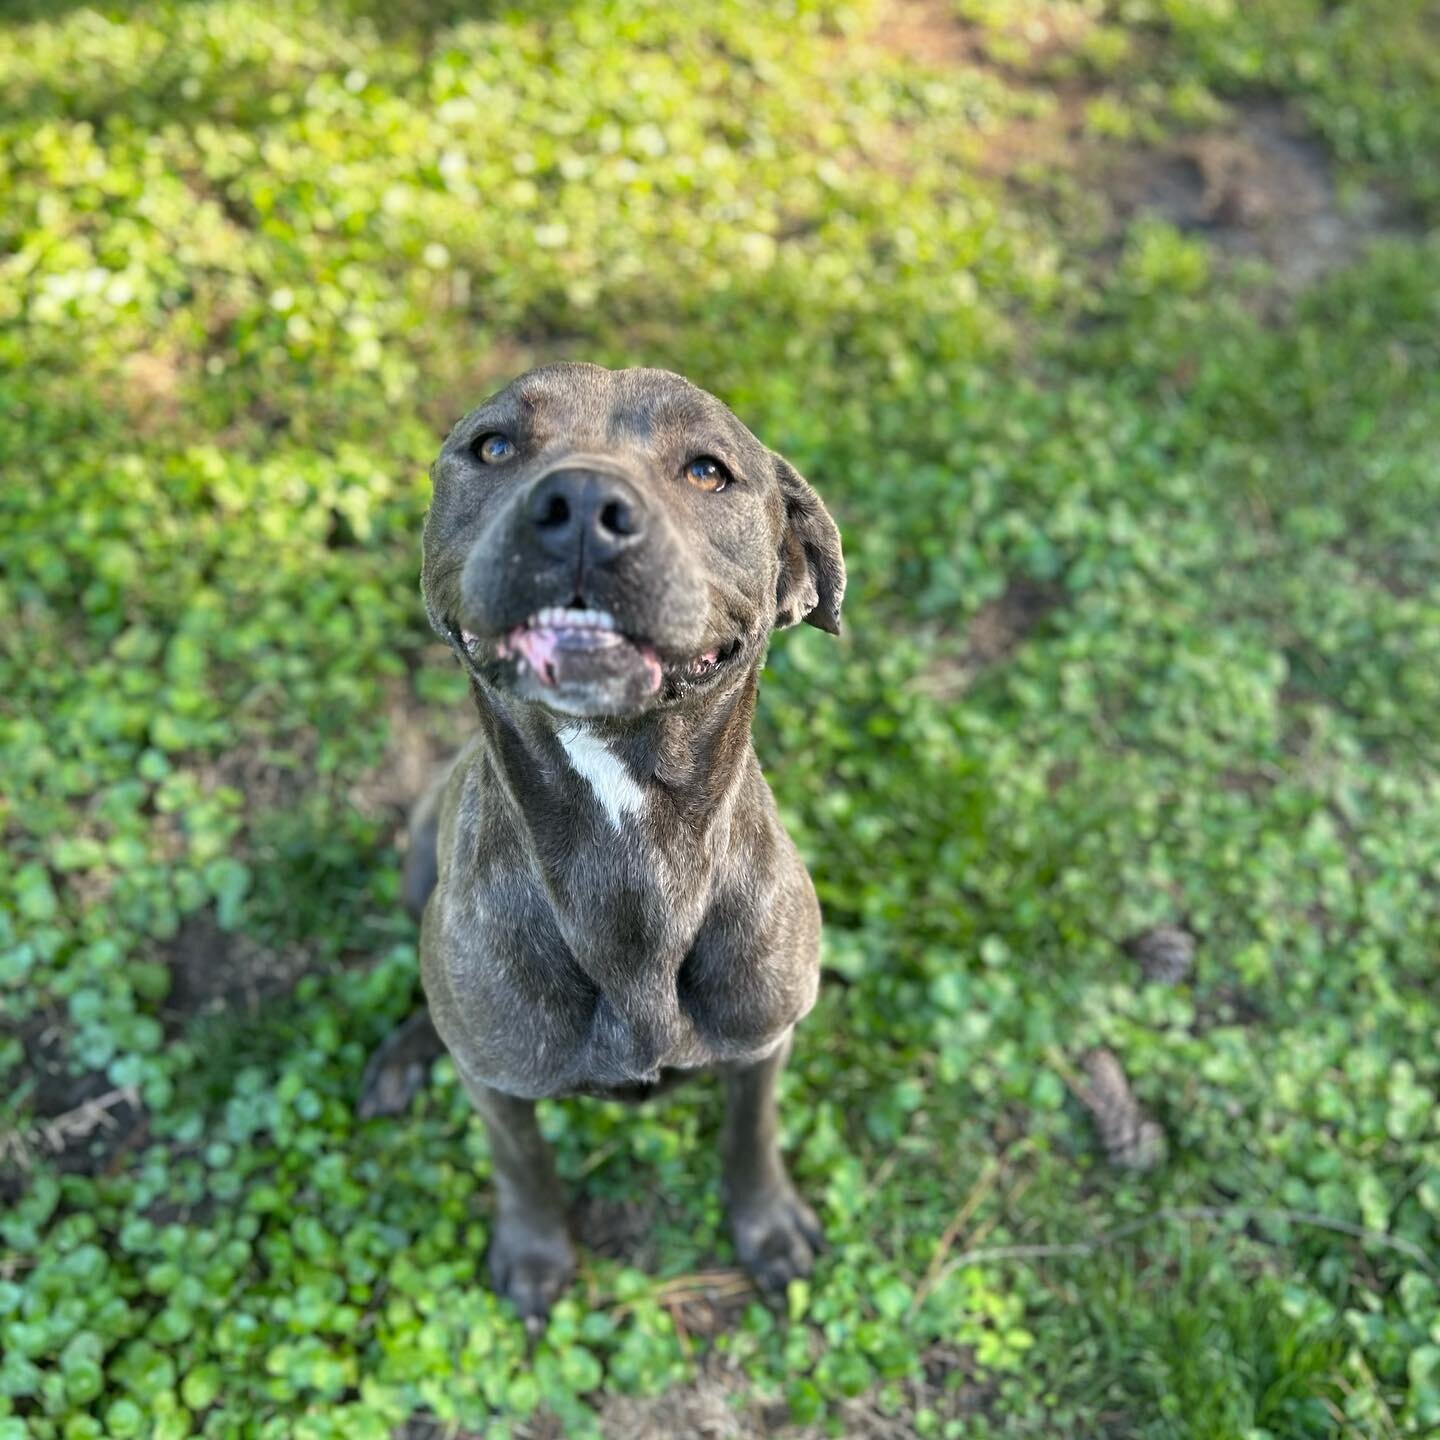 Another new member we welcomed today, miss Ivy! Ivy is a beautiful 4 year old Cane Corso mix currently around 65 pounds! This lady was found wandering as a stray in rural SC and sadly after spending some lengthy time at the shelter we finally were ab